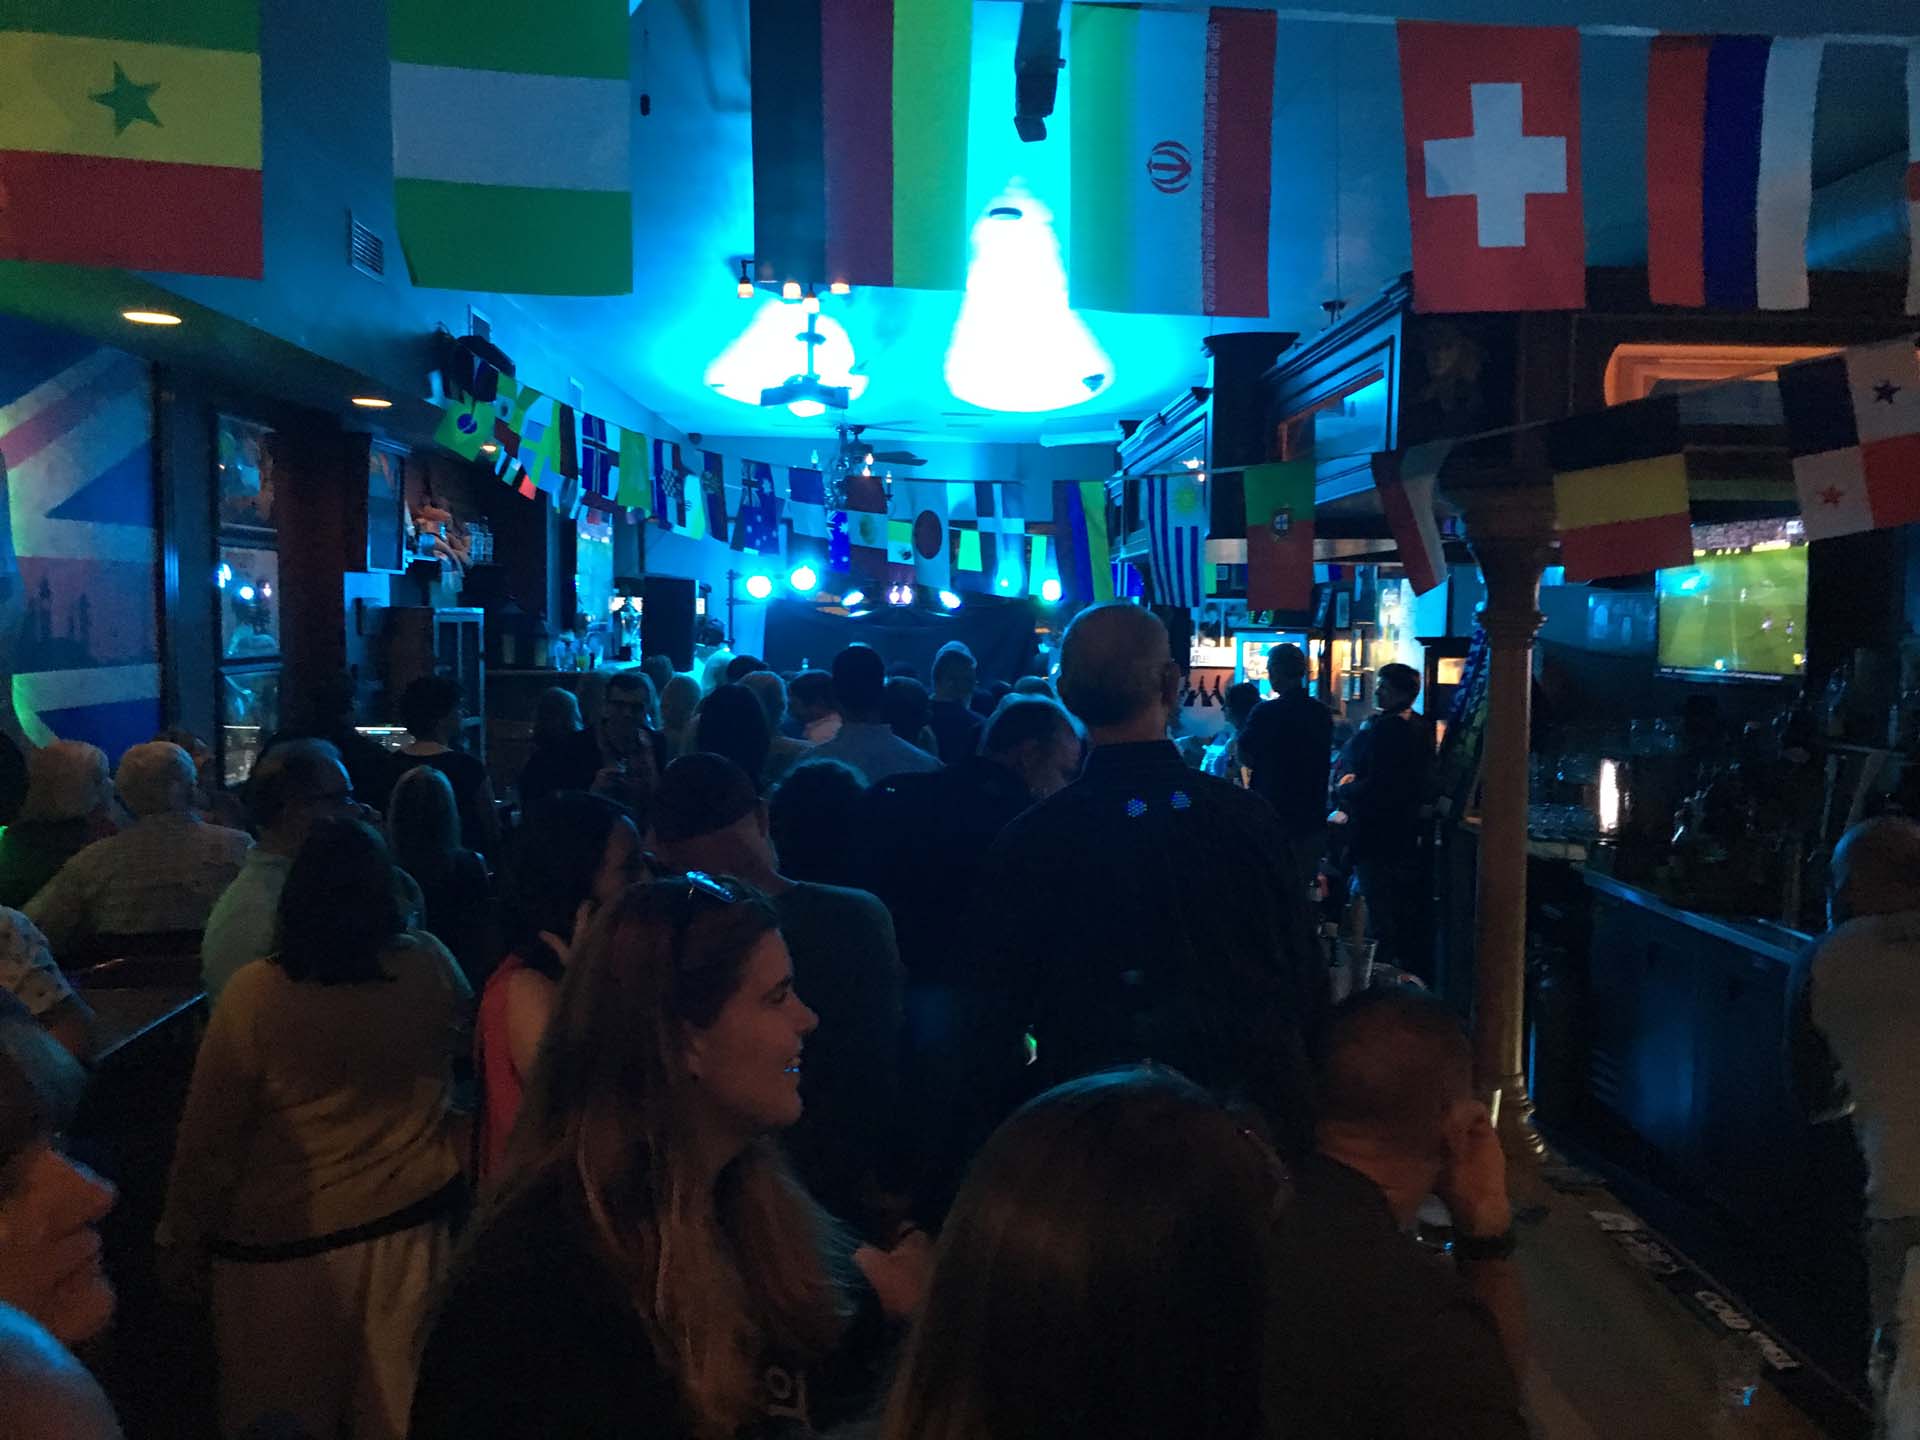 image of crow watching band play on stage with different country flags hanging above streaming across the ceiling of the room